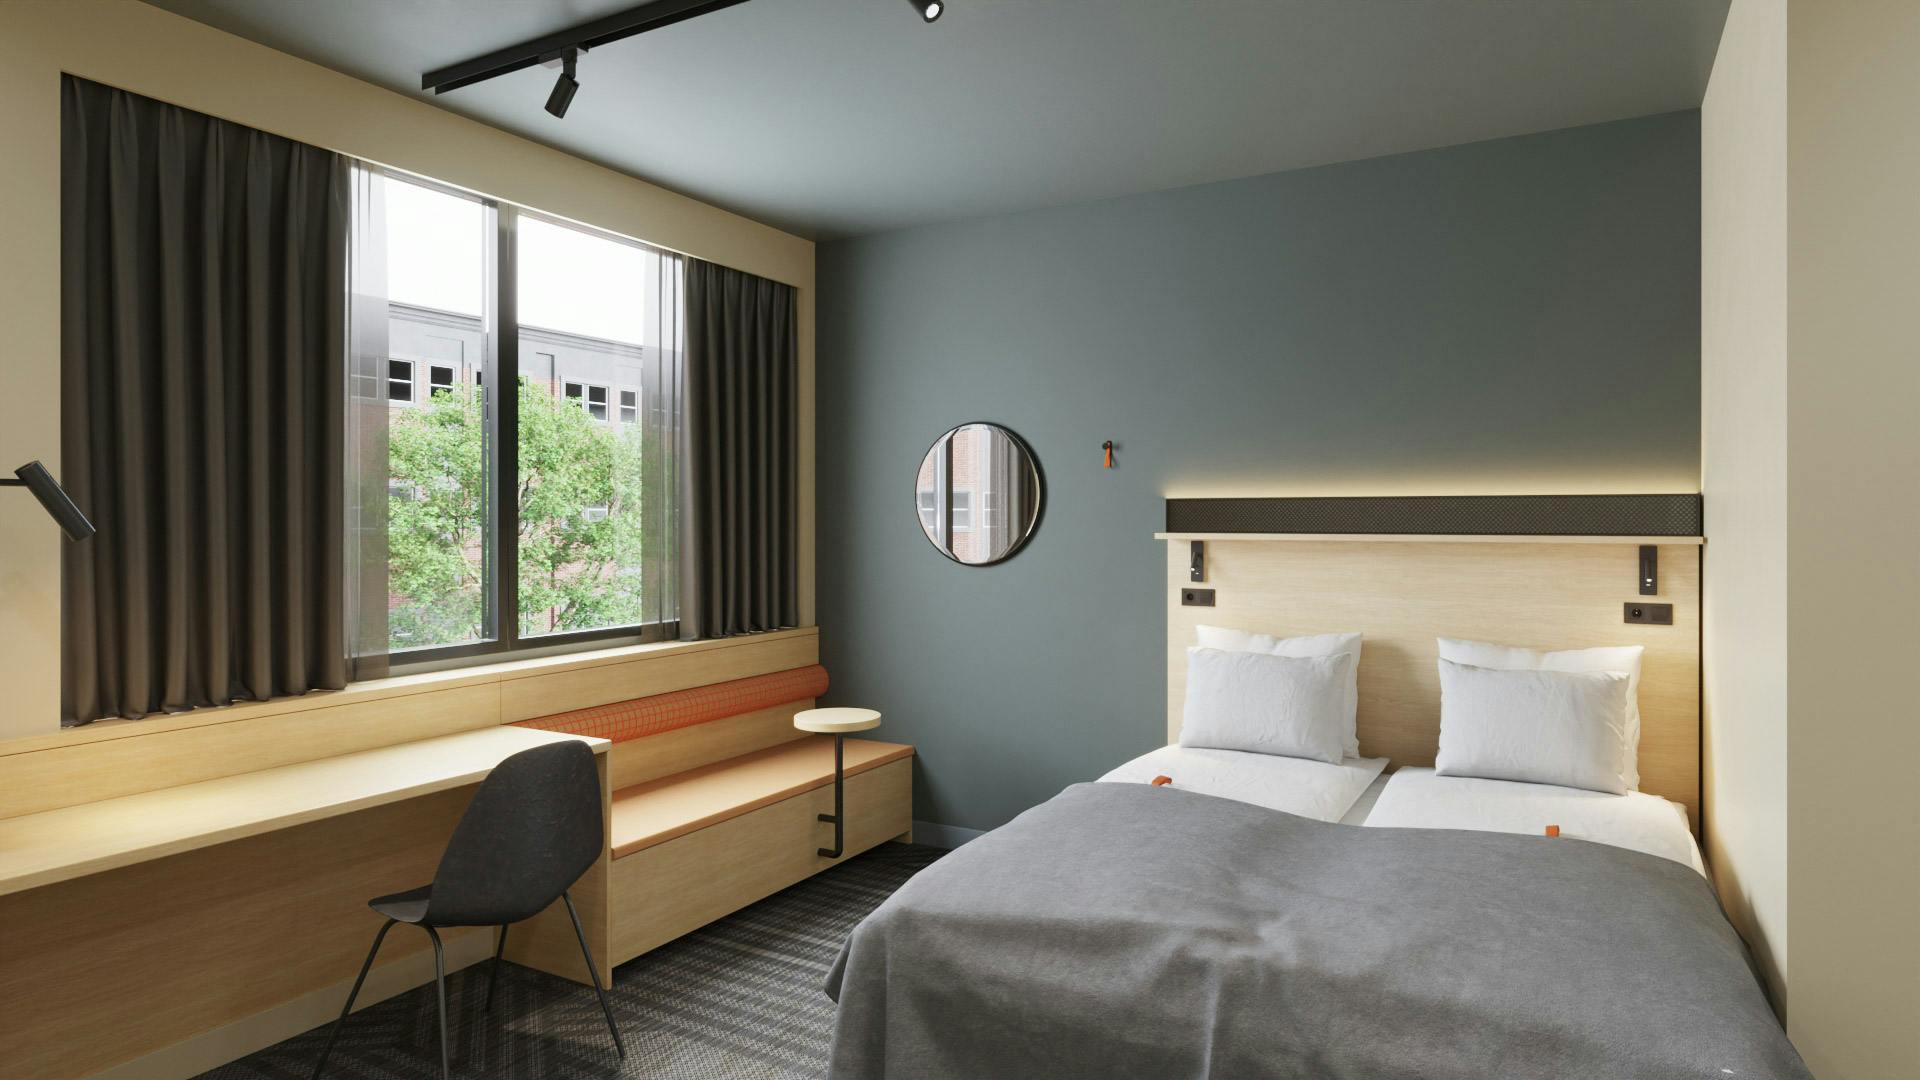 Small double room in Citybox Brussels. Bed, desk, seating area and windows.